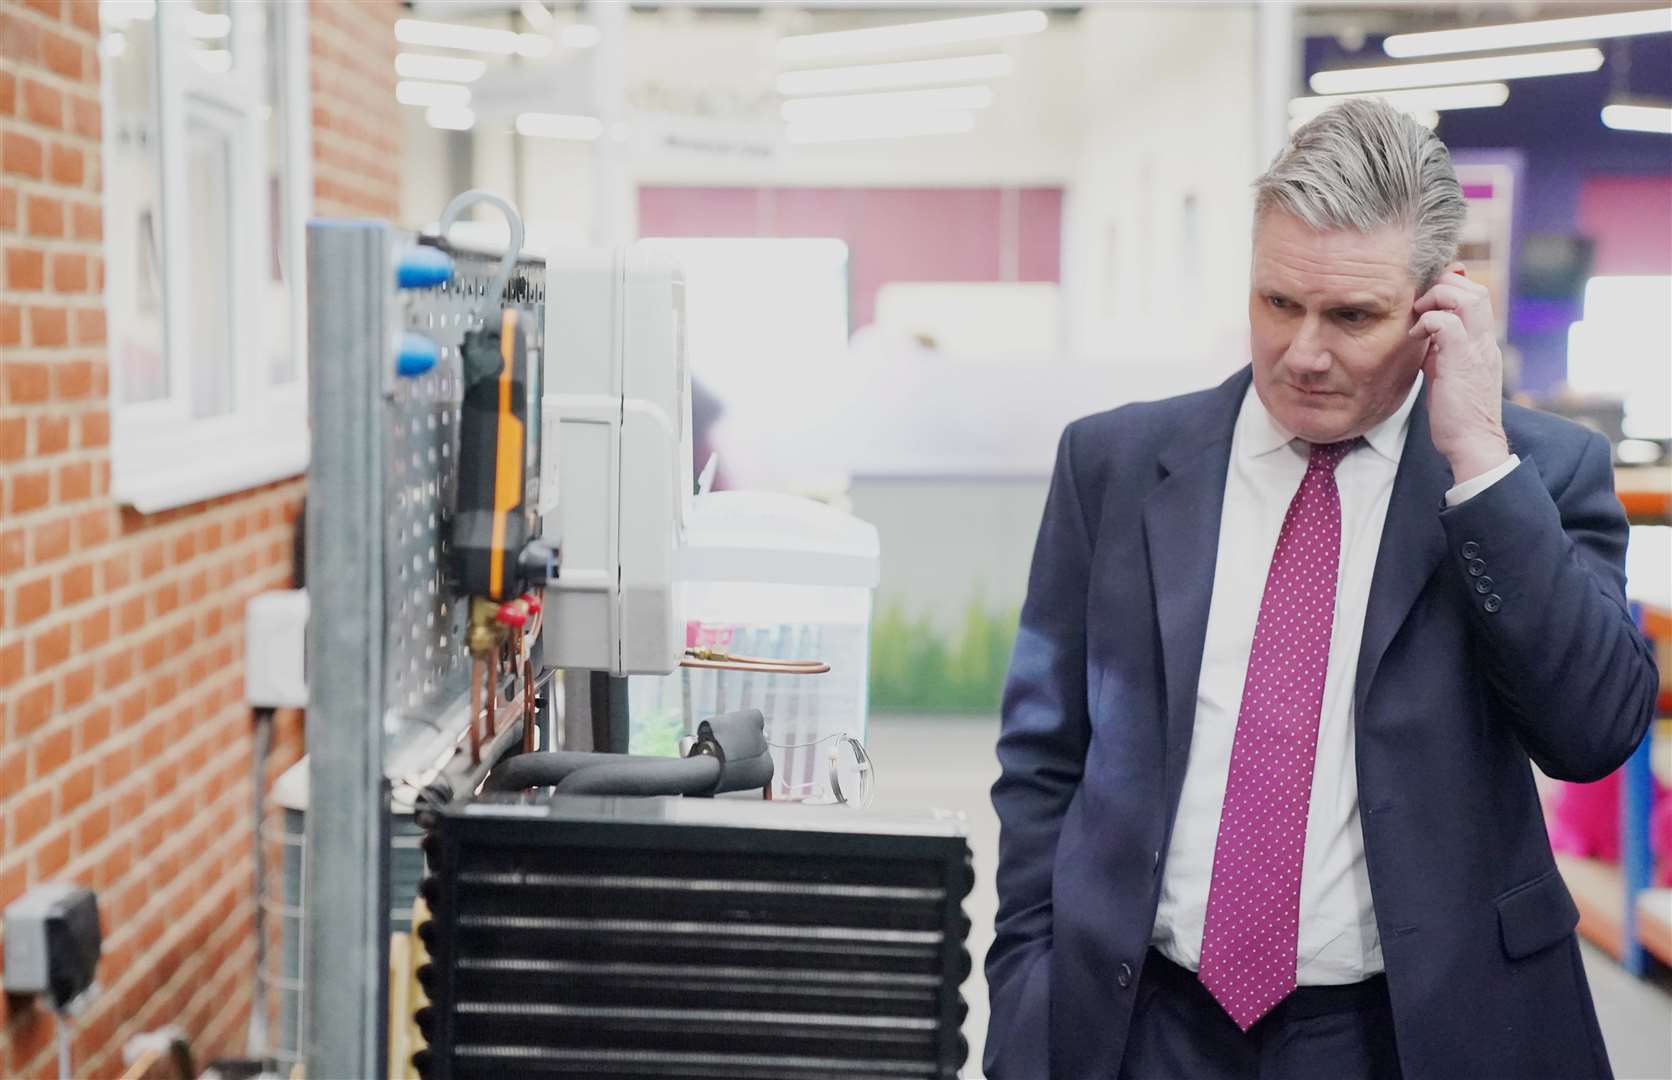 Labour party leader Sir Keir Starmer inspects a heat pump demonstrator during a visit to renewable energy company, Octopus Energy (Jonathan Brady/PA)